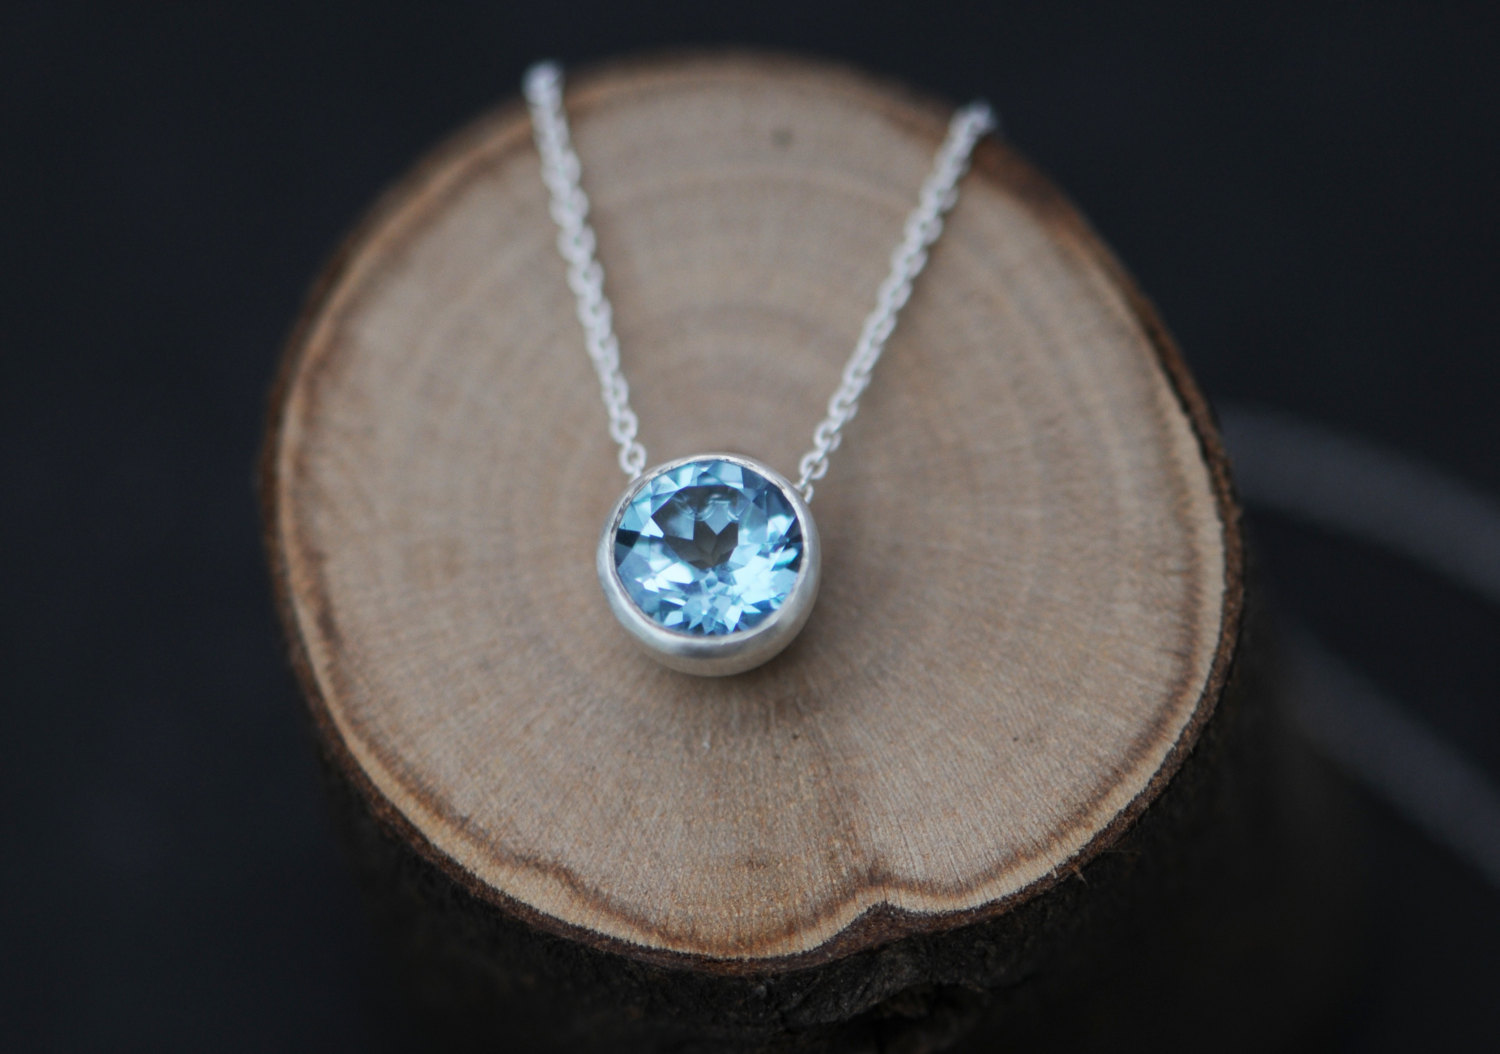 Lovely sky blue topaz, set in satin finished sterling silver pendant on a silver chain. Designed and handmade in Cornwall, UK by William White